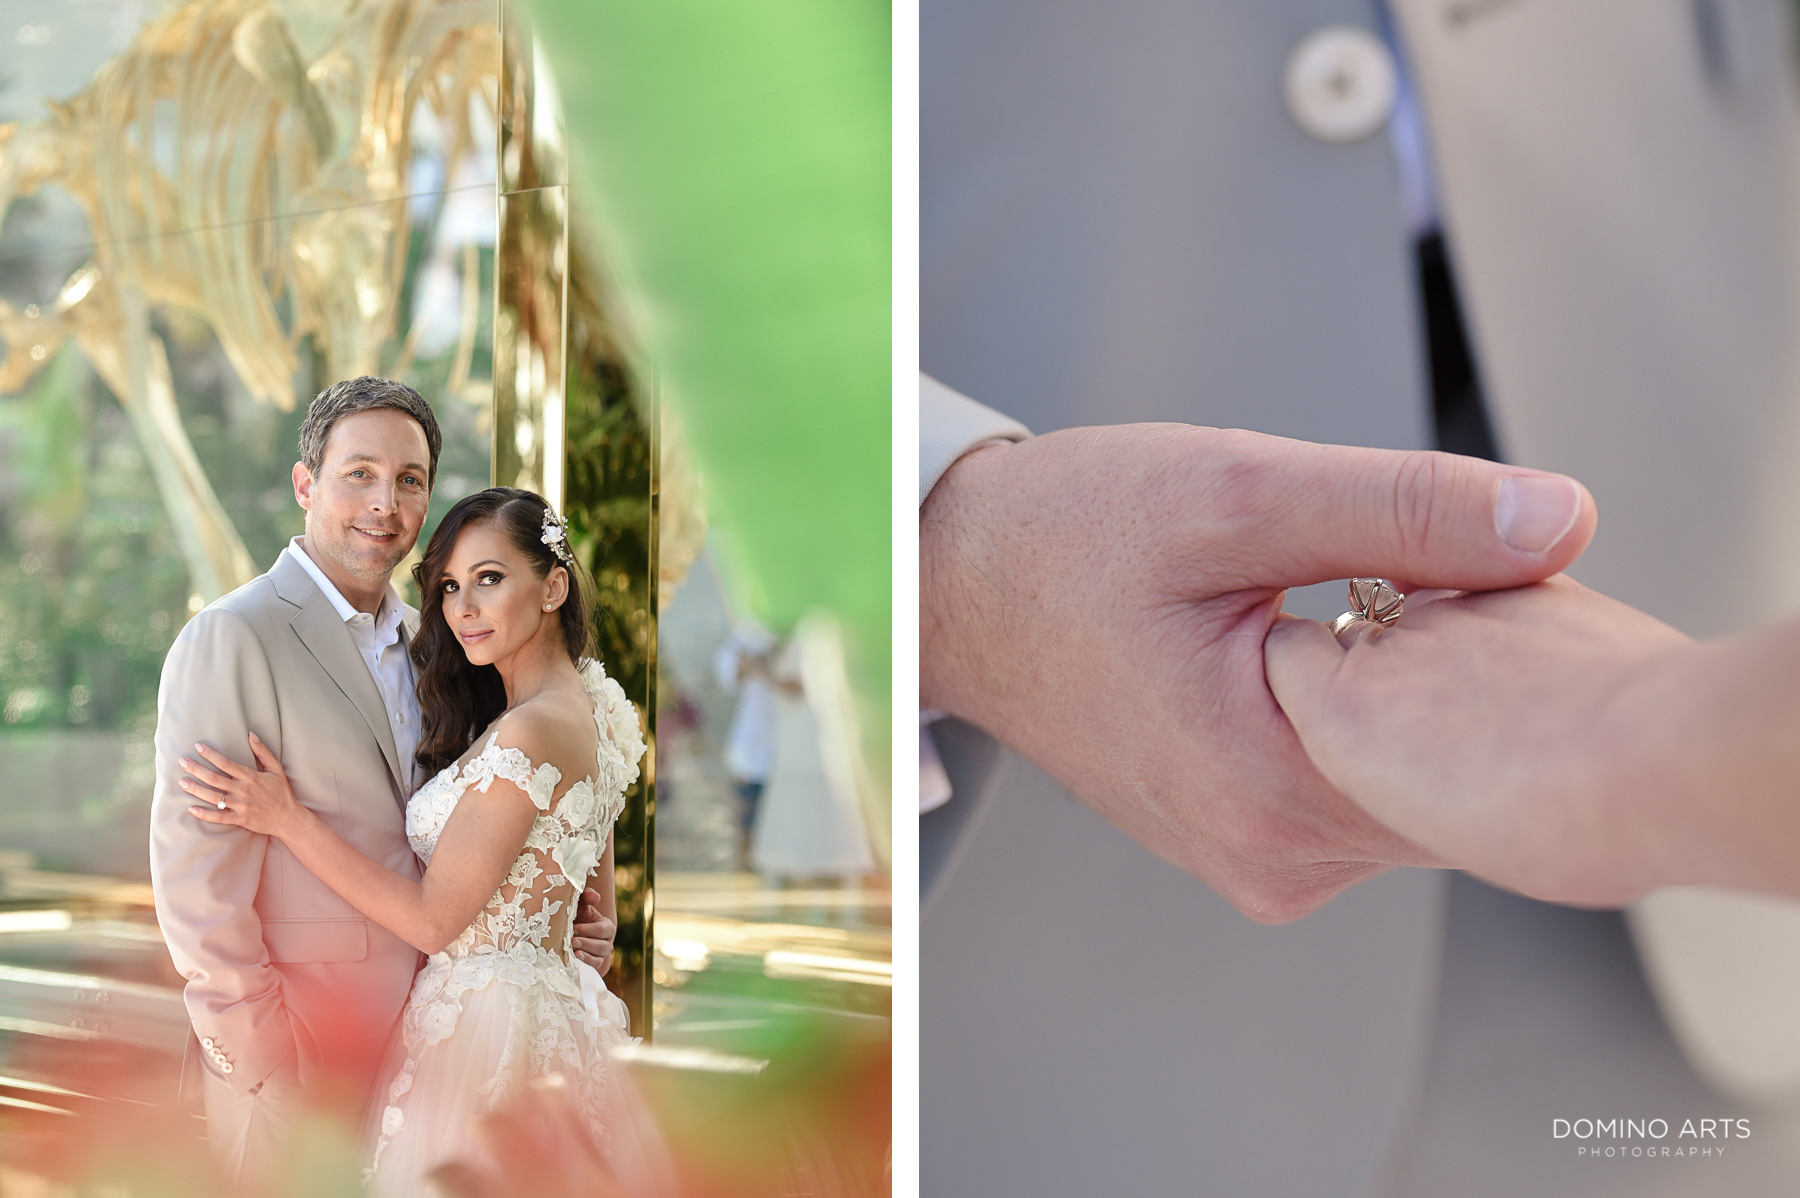 Bride and groom at Luxury Destination Beach Wedding Photography at Faena Hotel